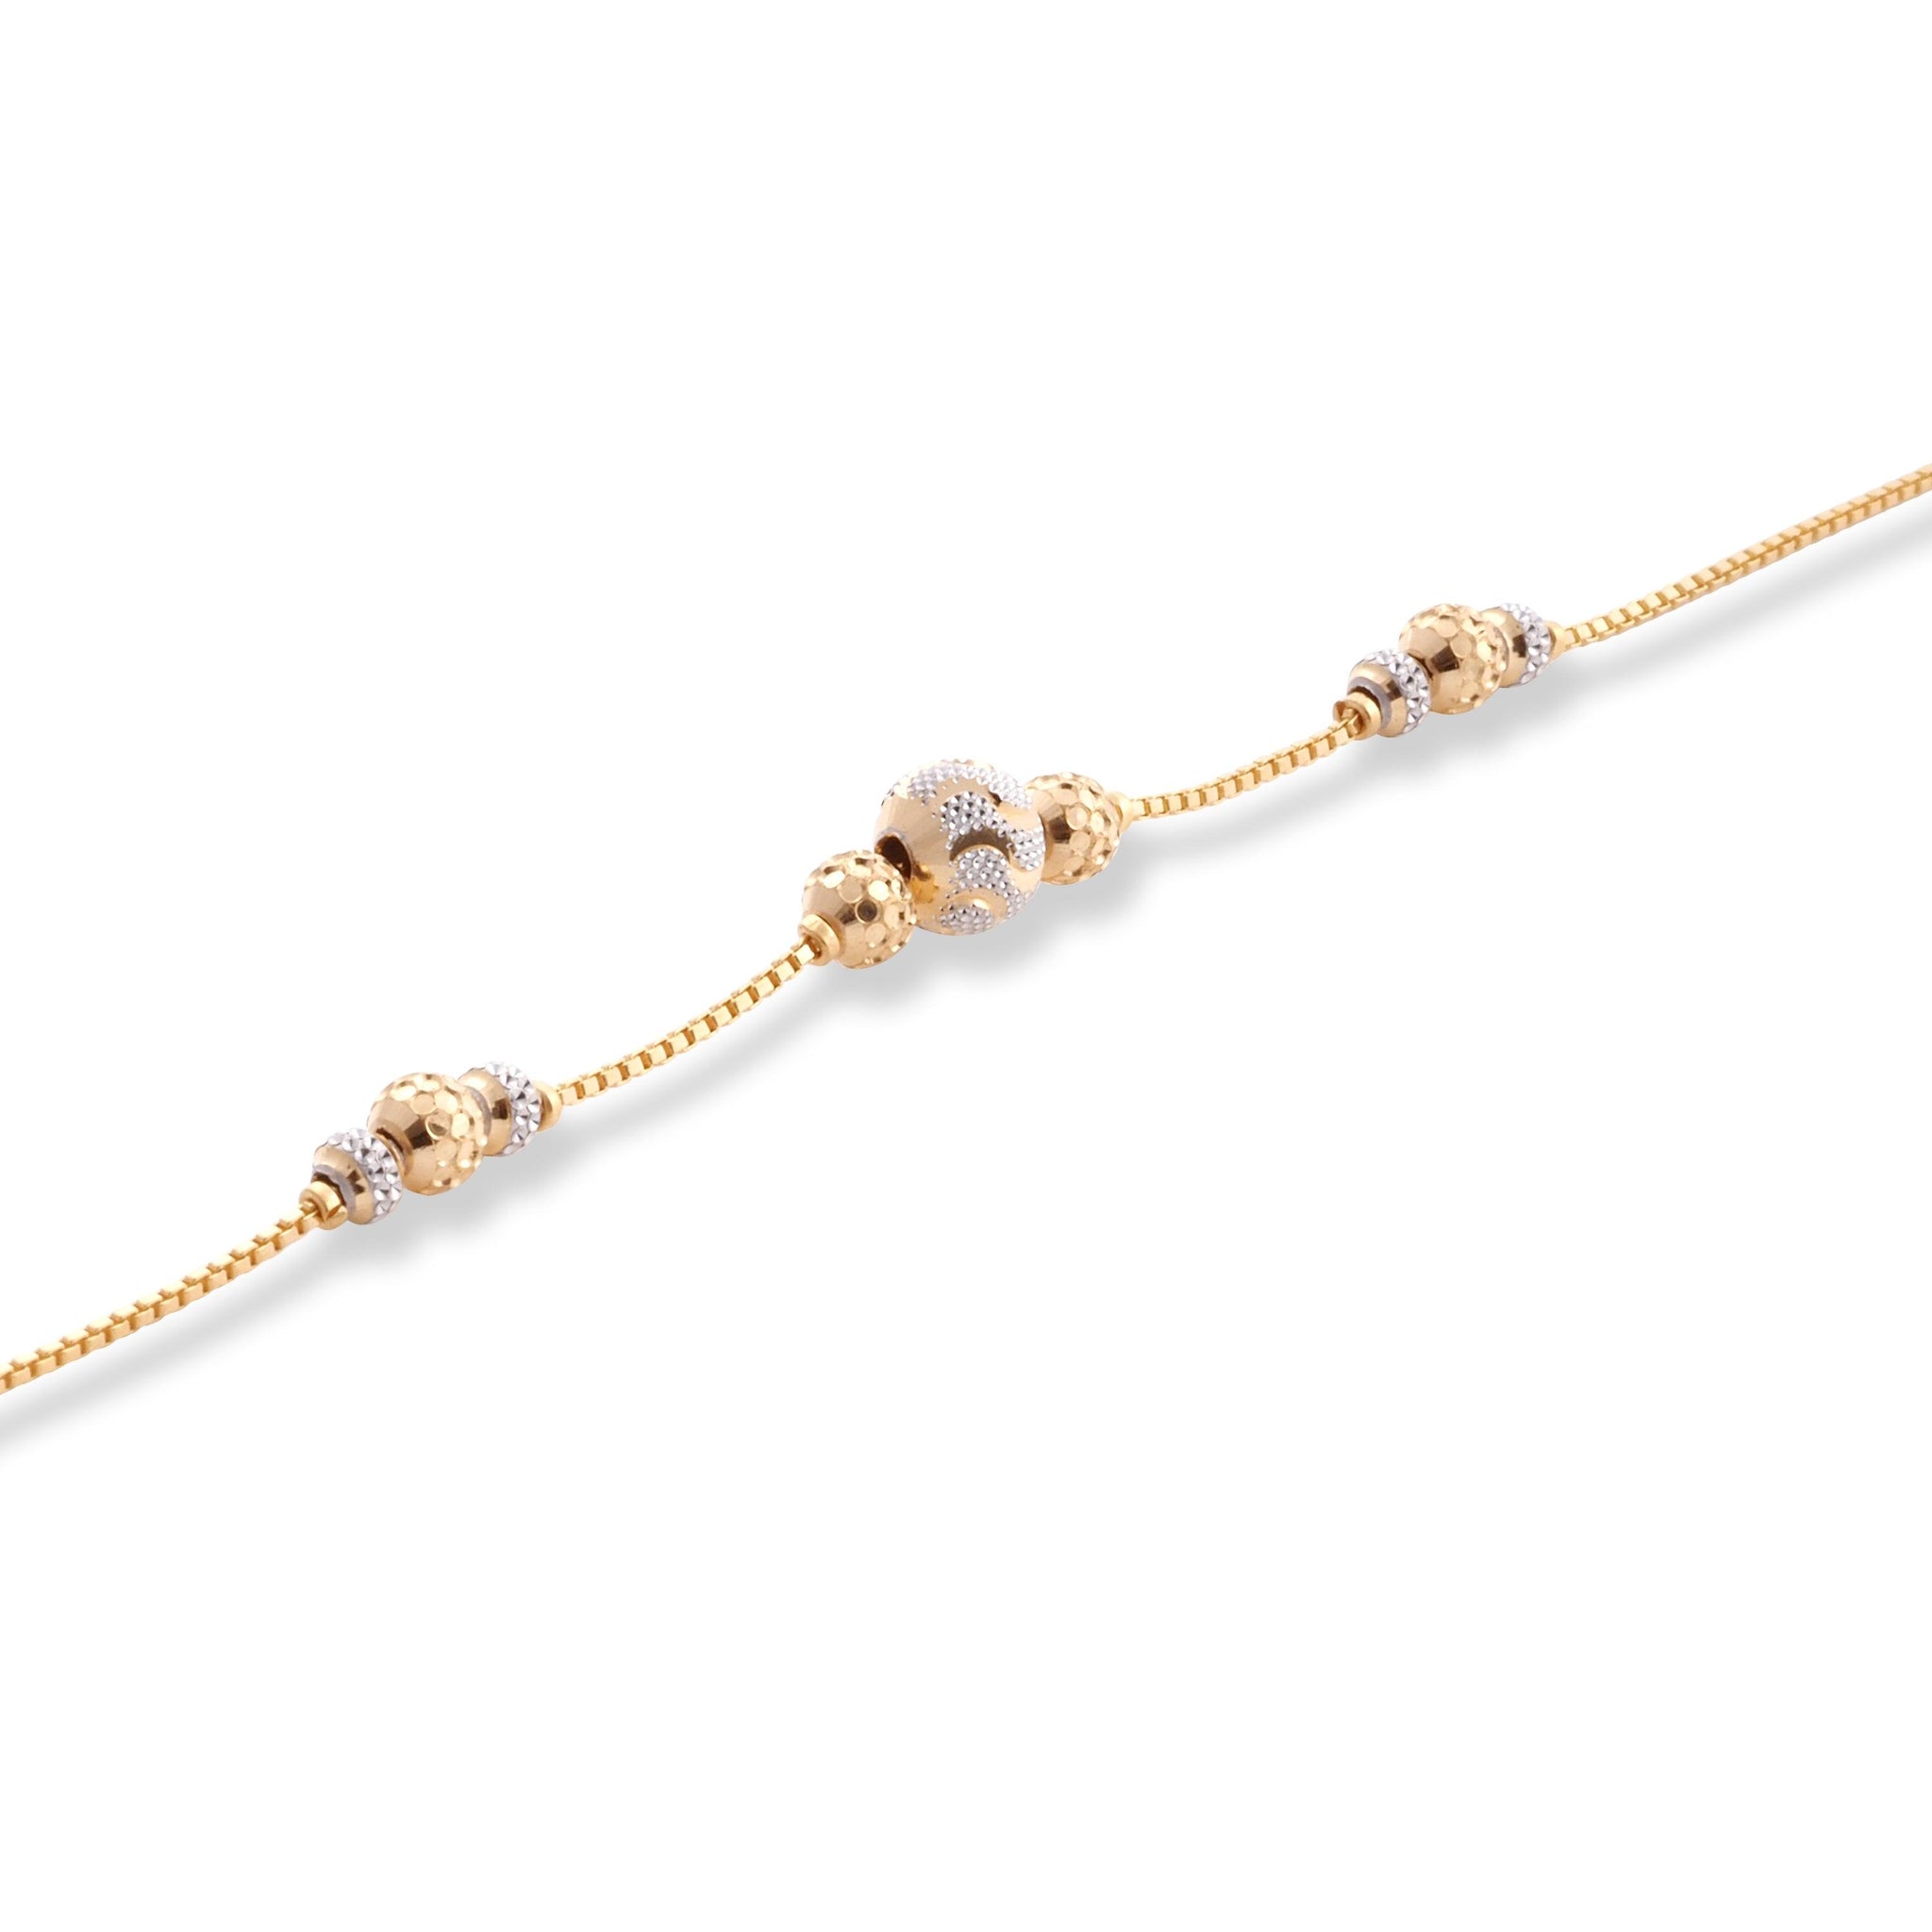 22ct Yellow Gold Bracelet in Rhodium Plating Beads with ''S'' Clasp LBR-8504